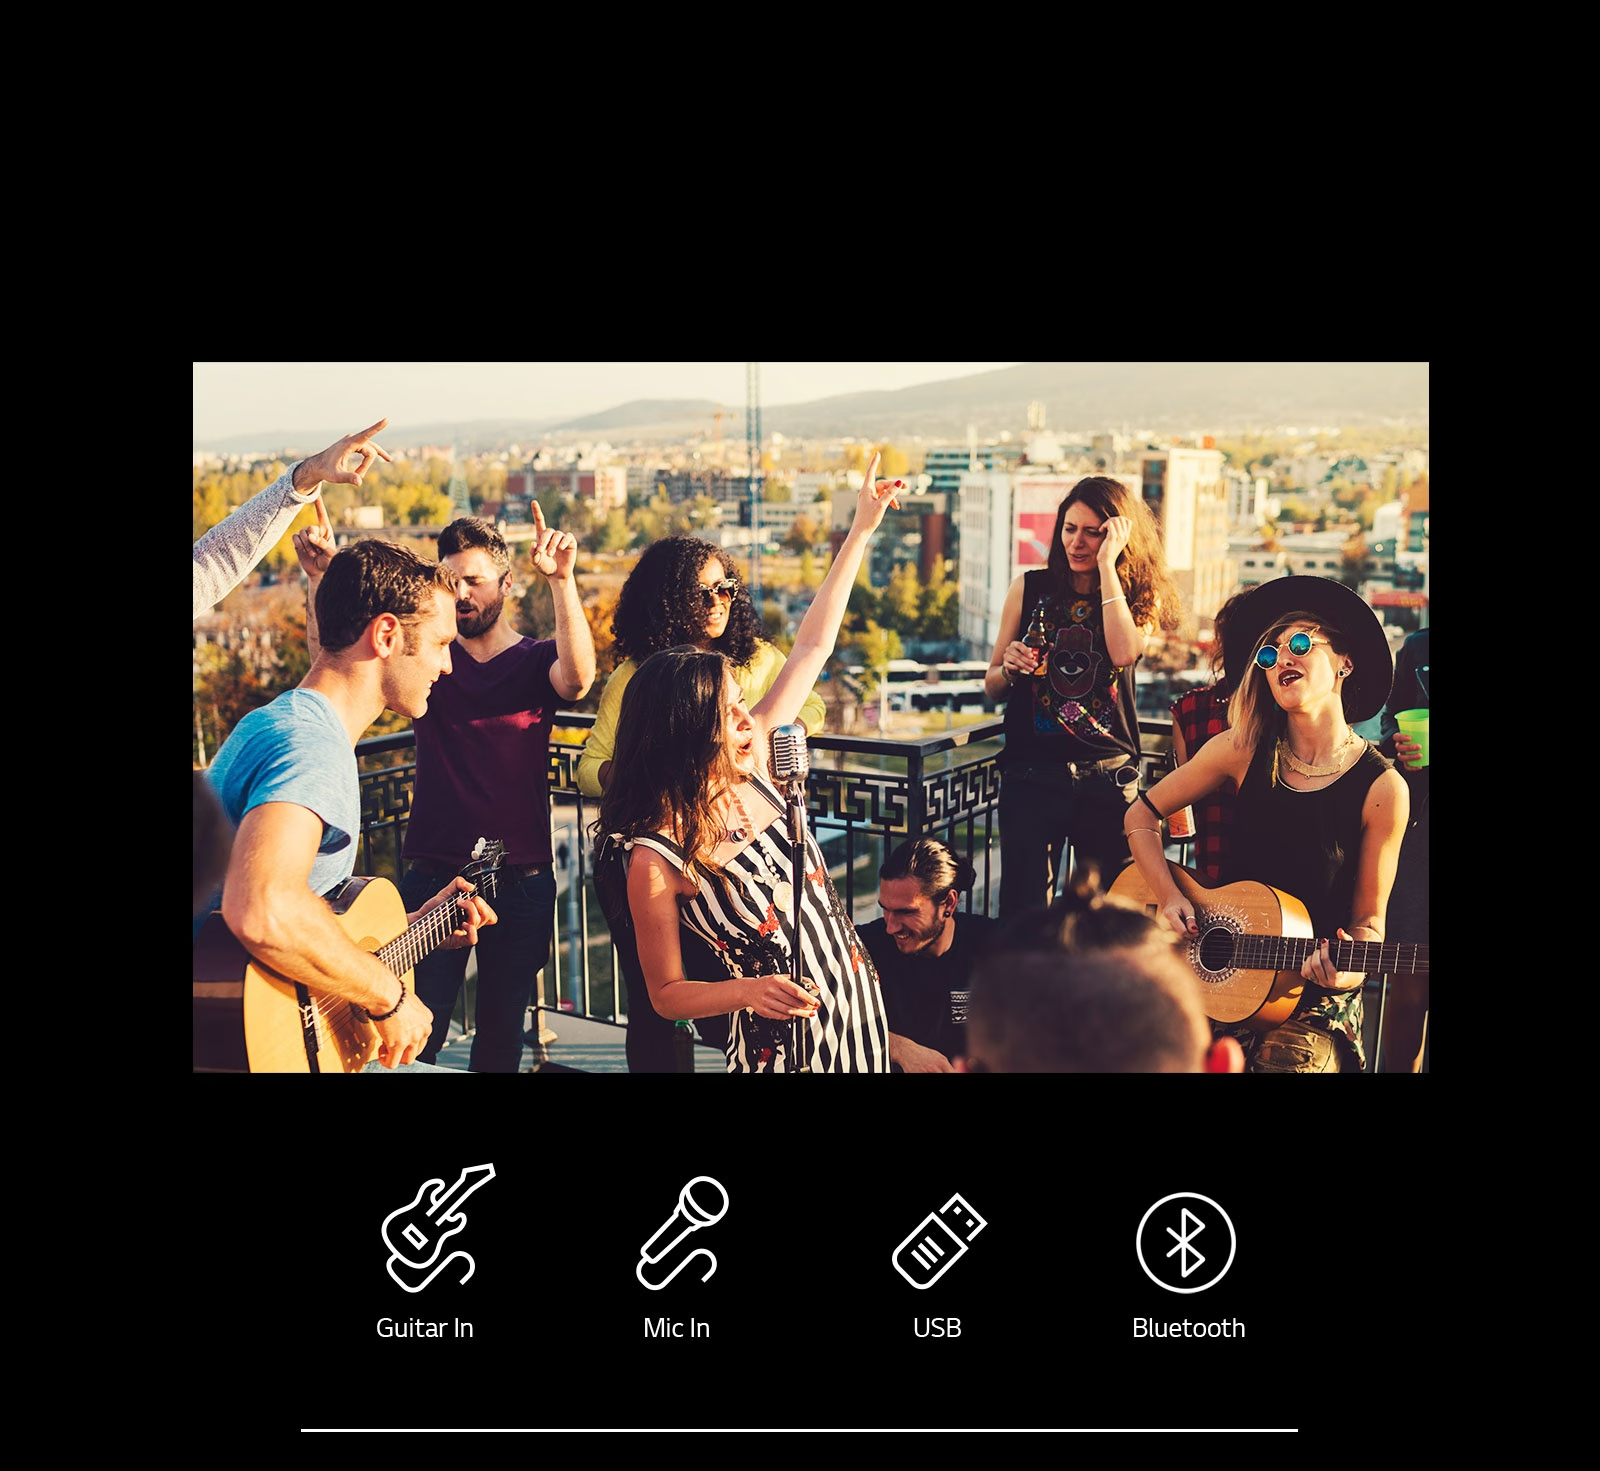 There are people enjoying acoustic concert with LG XBOOM XL7S. Below the image, there are guitar 